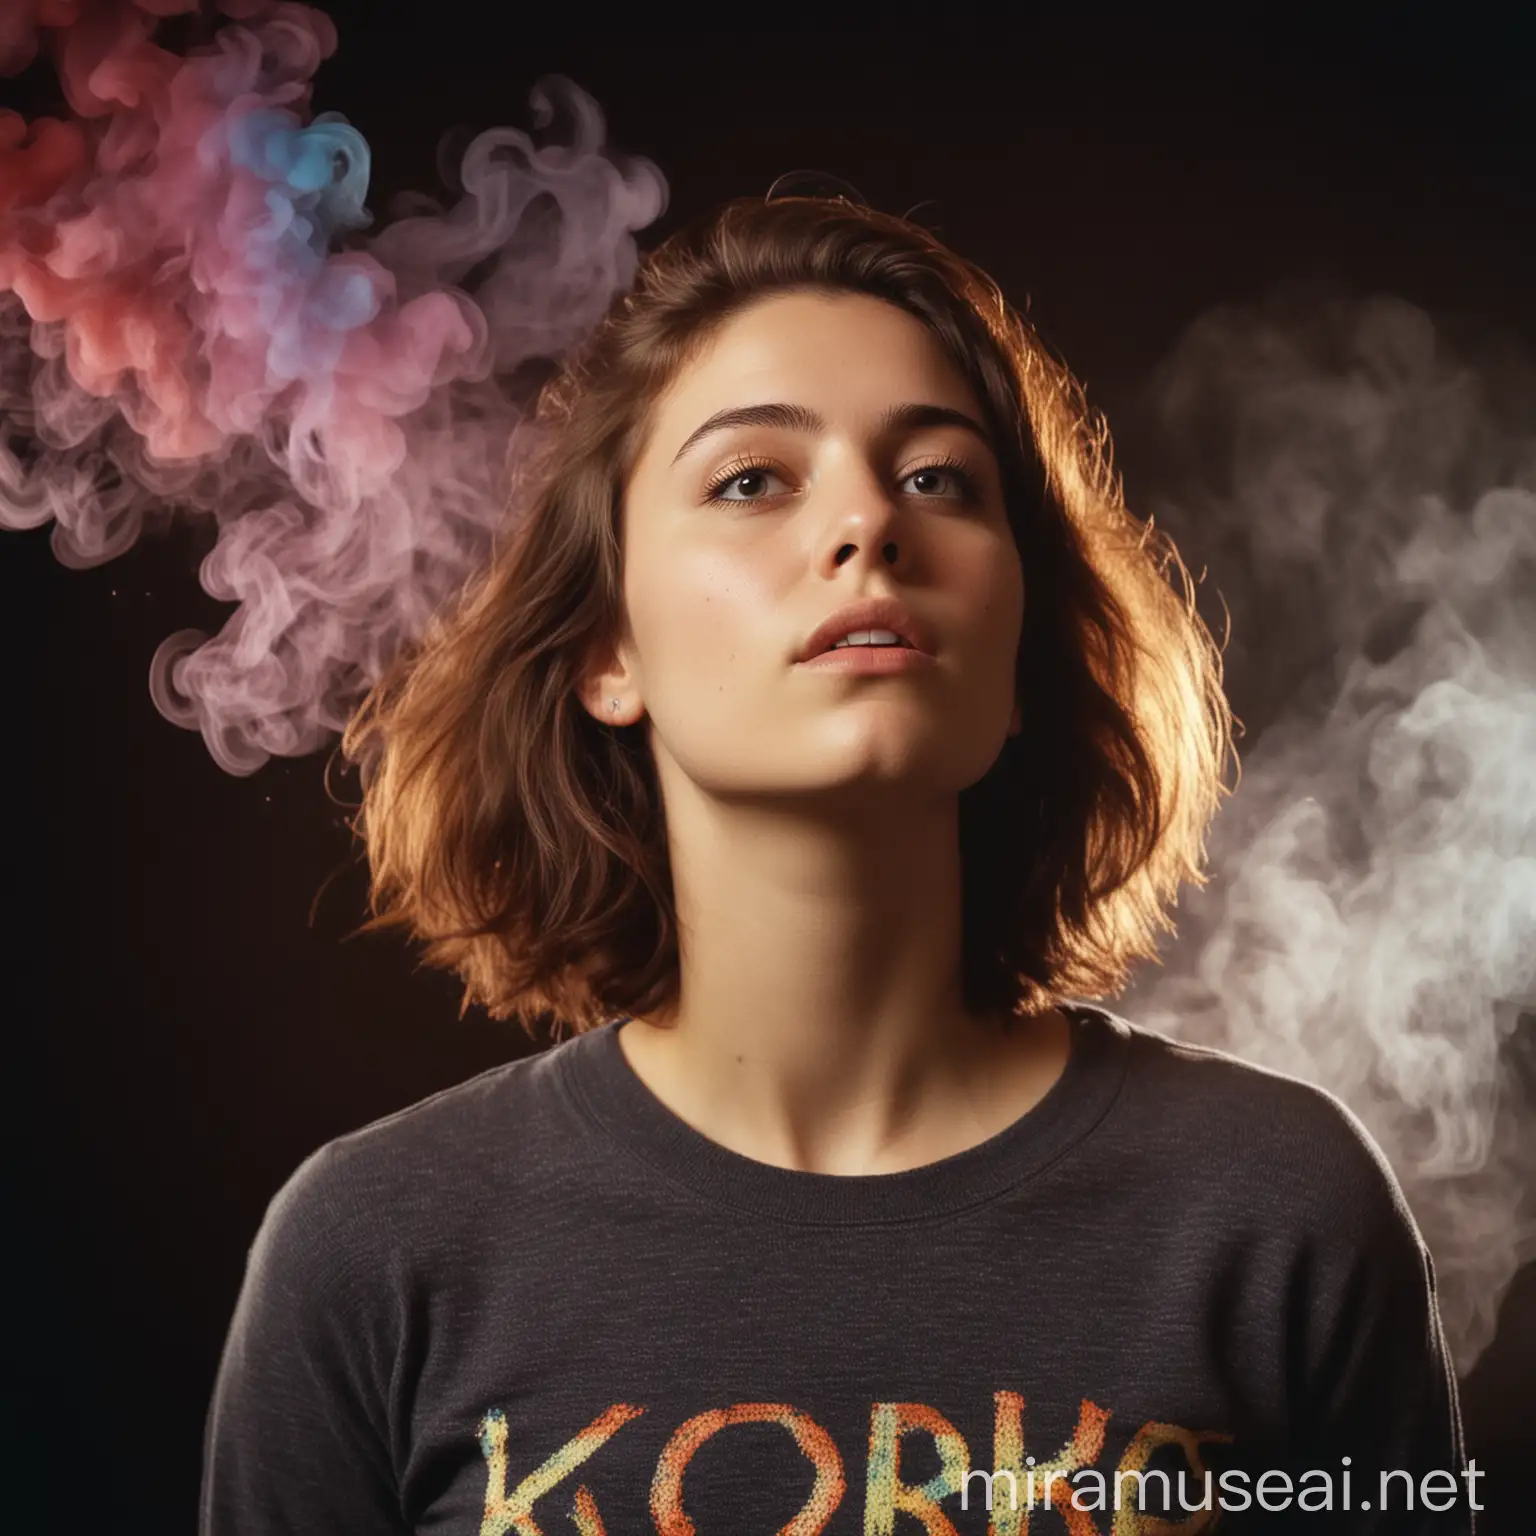 three-quarter portrait headshot of young woman looking up, wearing a casual knit tshirt. She looks like she’s thinking and wondering what’s above her. The background is black with colorful smoke rising behind her. The style is Kodak gold in noir, dark.